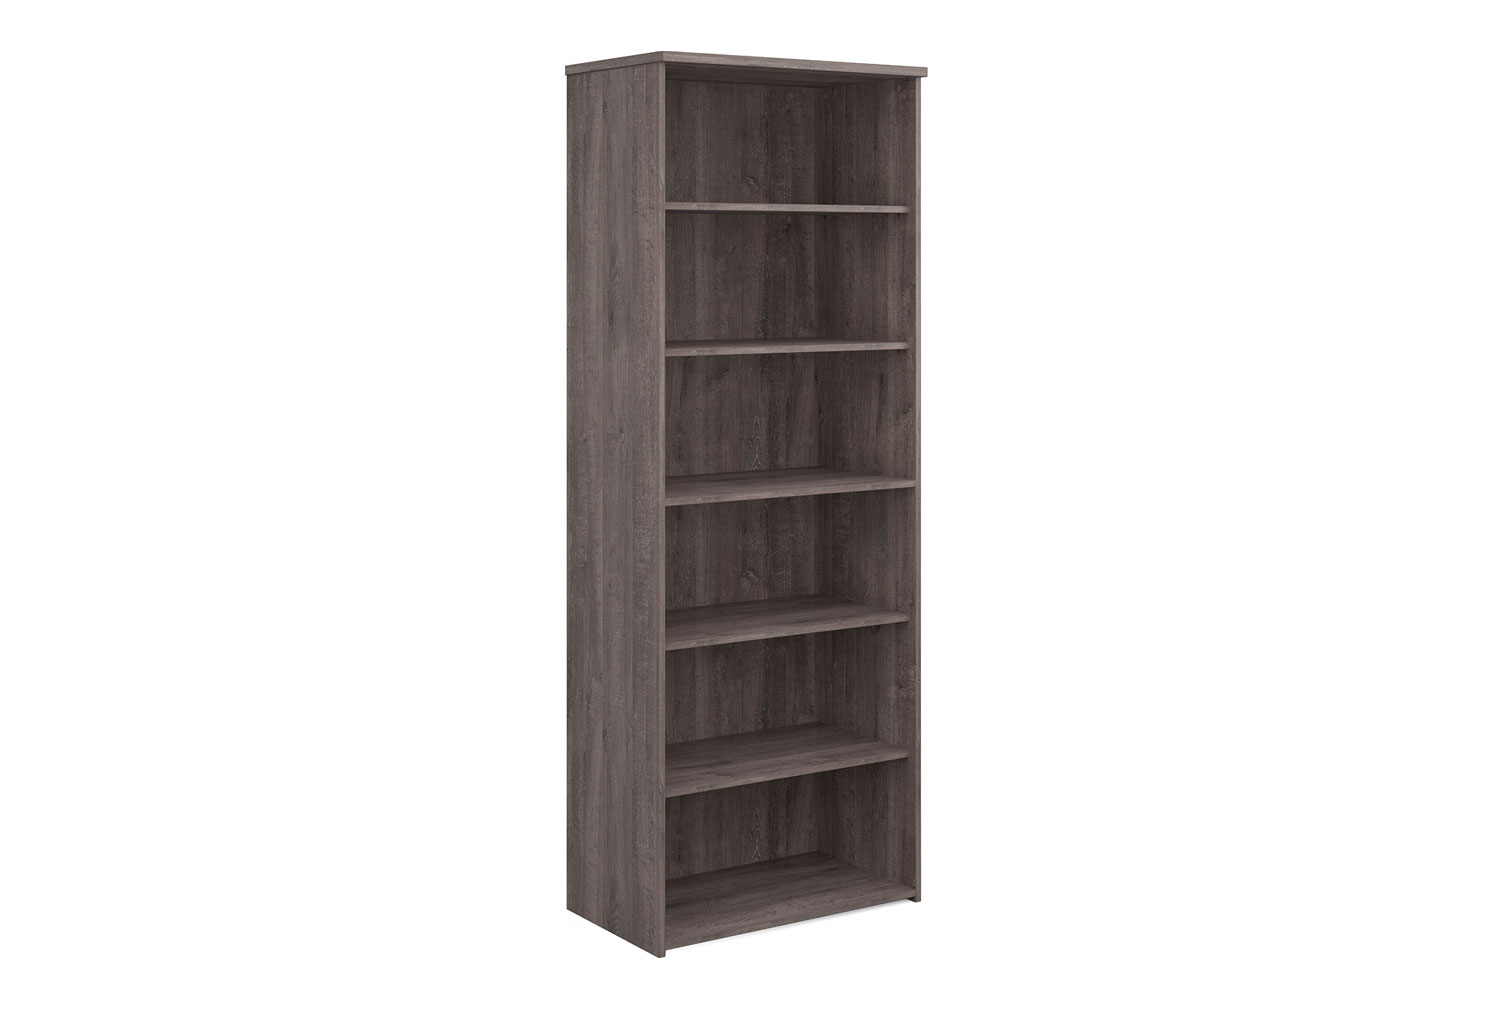 Cantero Home Office Bookcase, 5 Shelf - 80wx47dx214h (cm), Grey Oak, Fully Installed